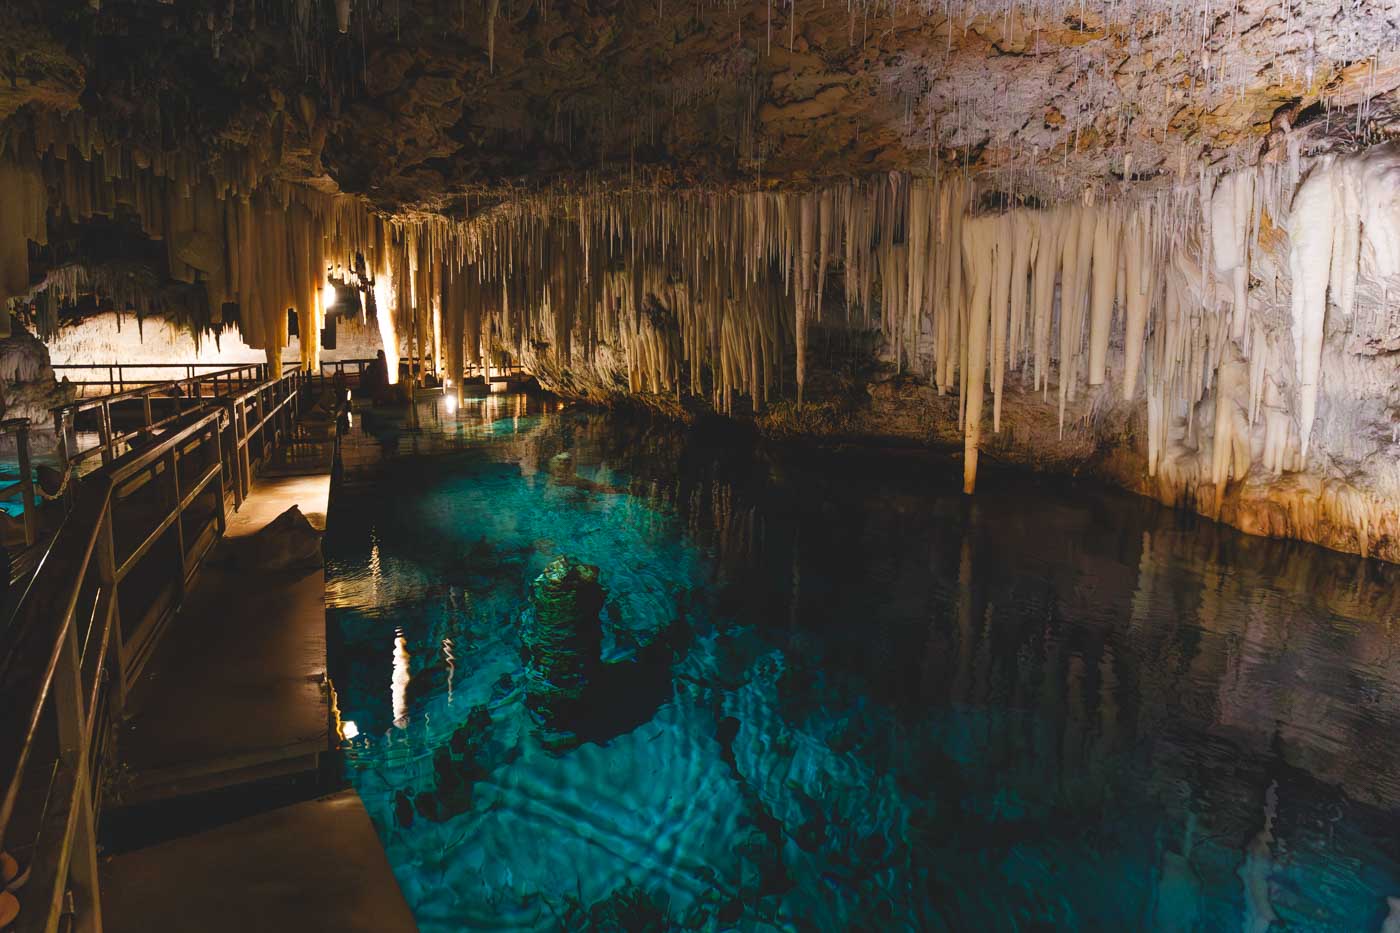 Looking to the right of the floating boardwalk to see the cavern ceiling full of stalactites along with stalagmites in the water below reaching upwards. 